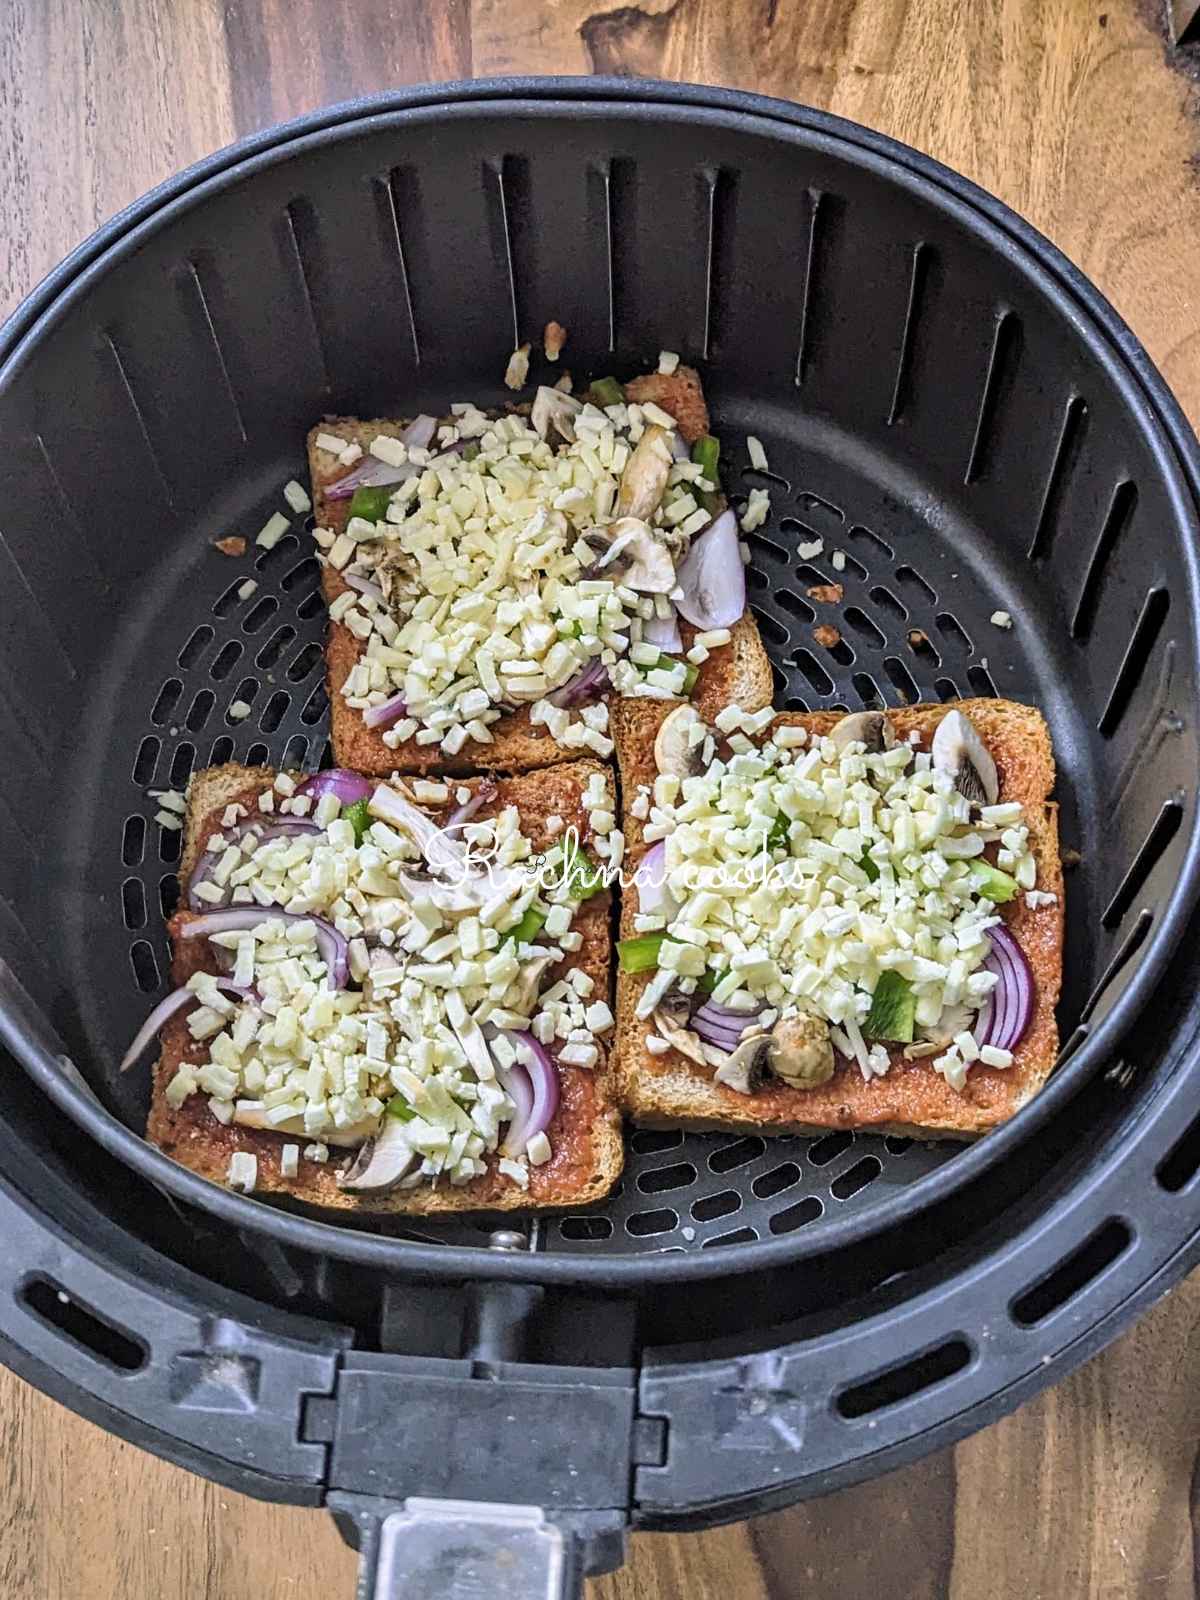 3 slices of bread pizza in air fryer basket.